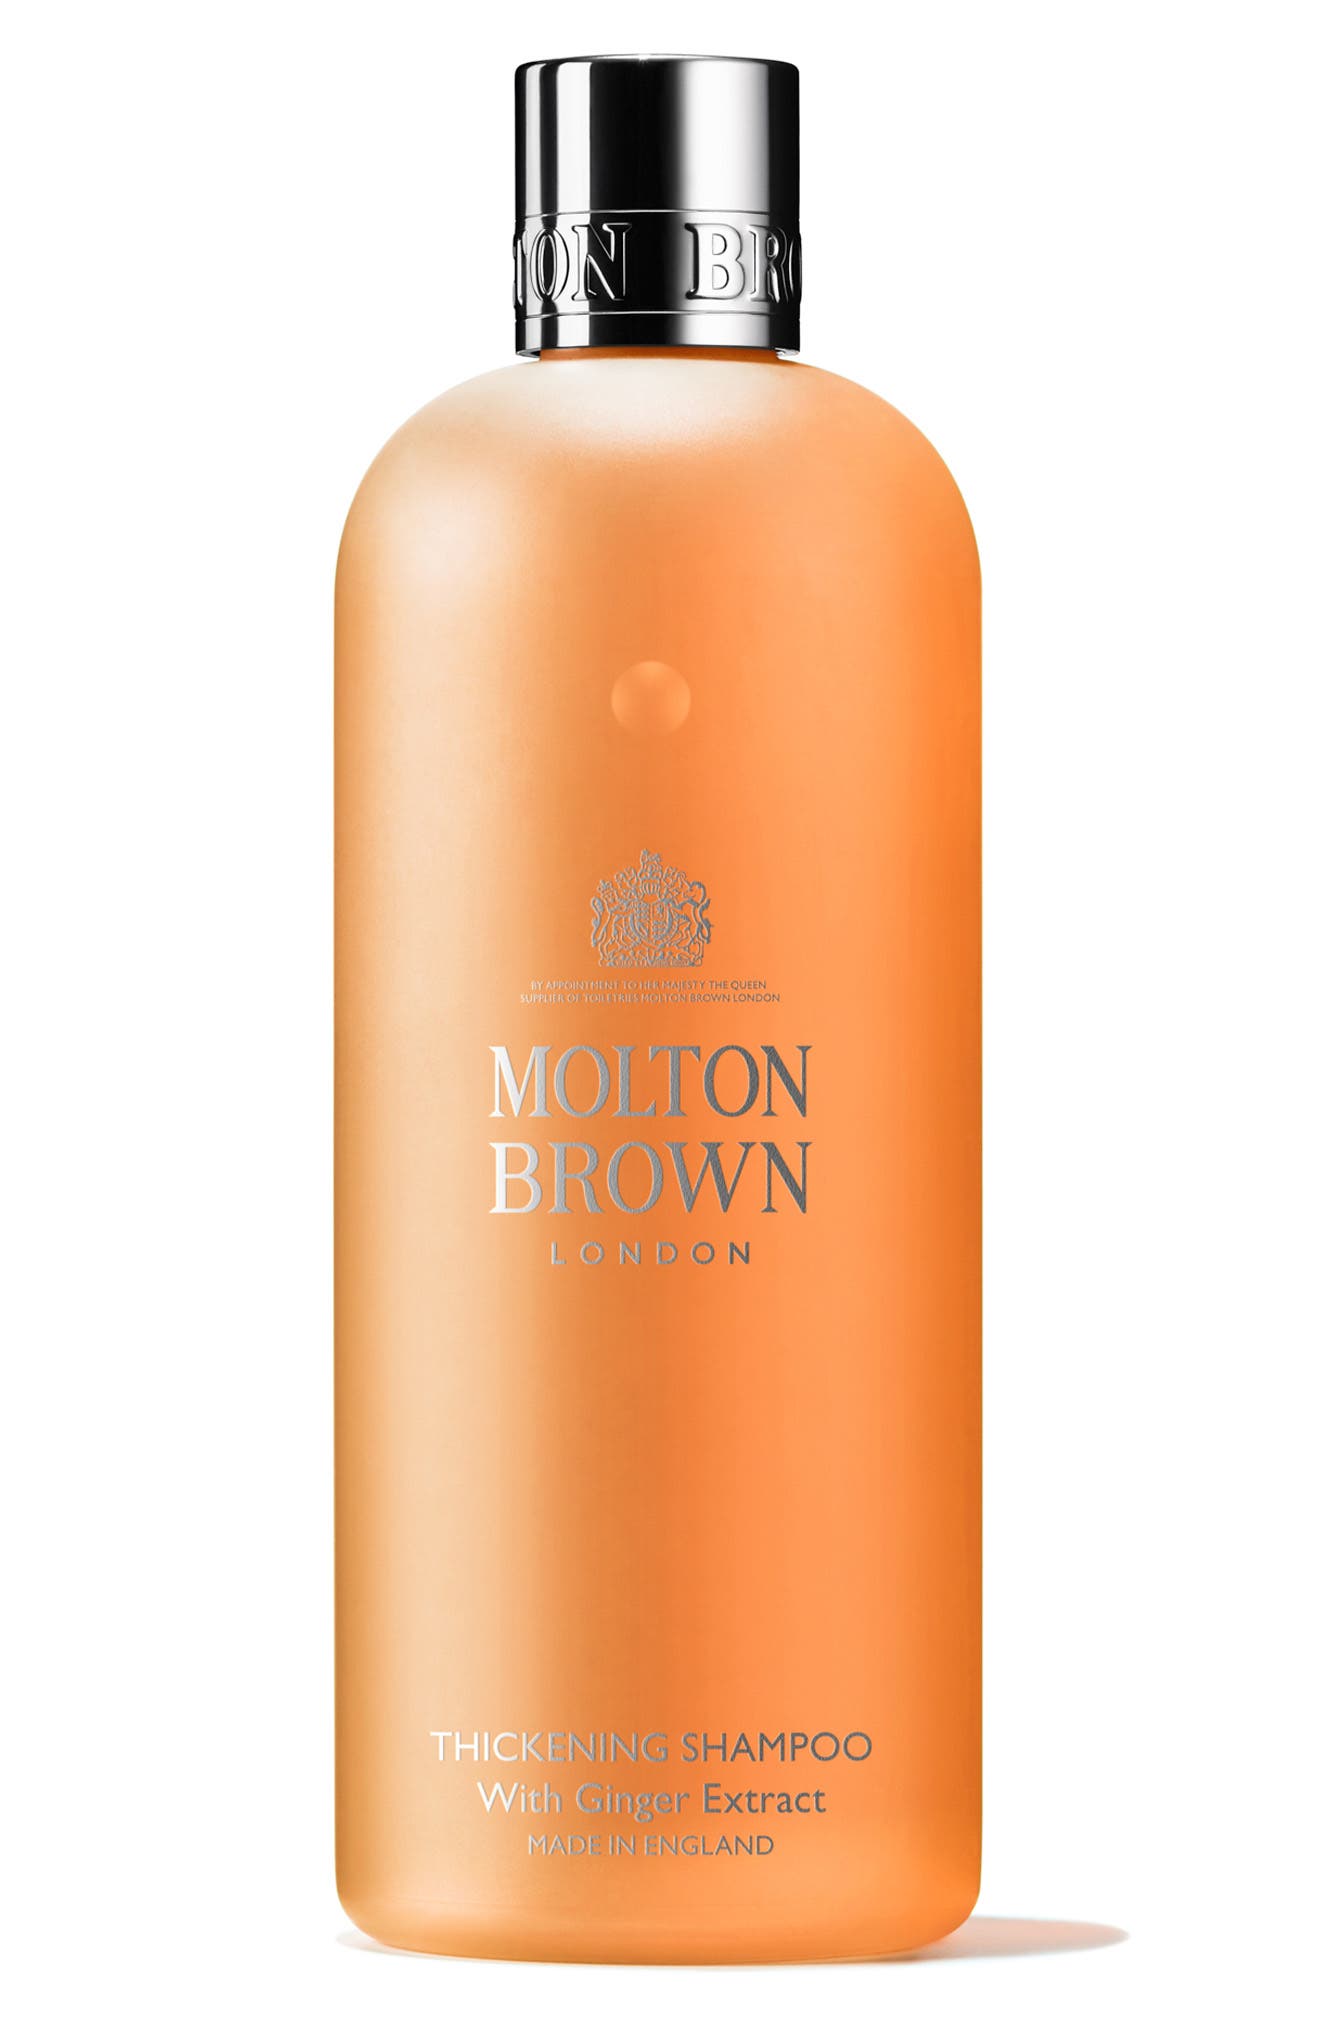 Thickening Shampoo with Ginger Extract Molton Brown